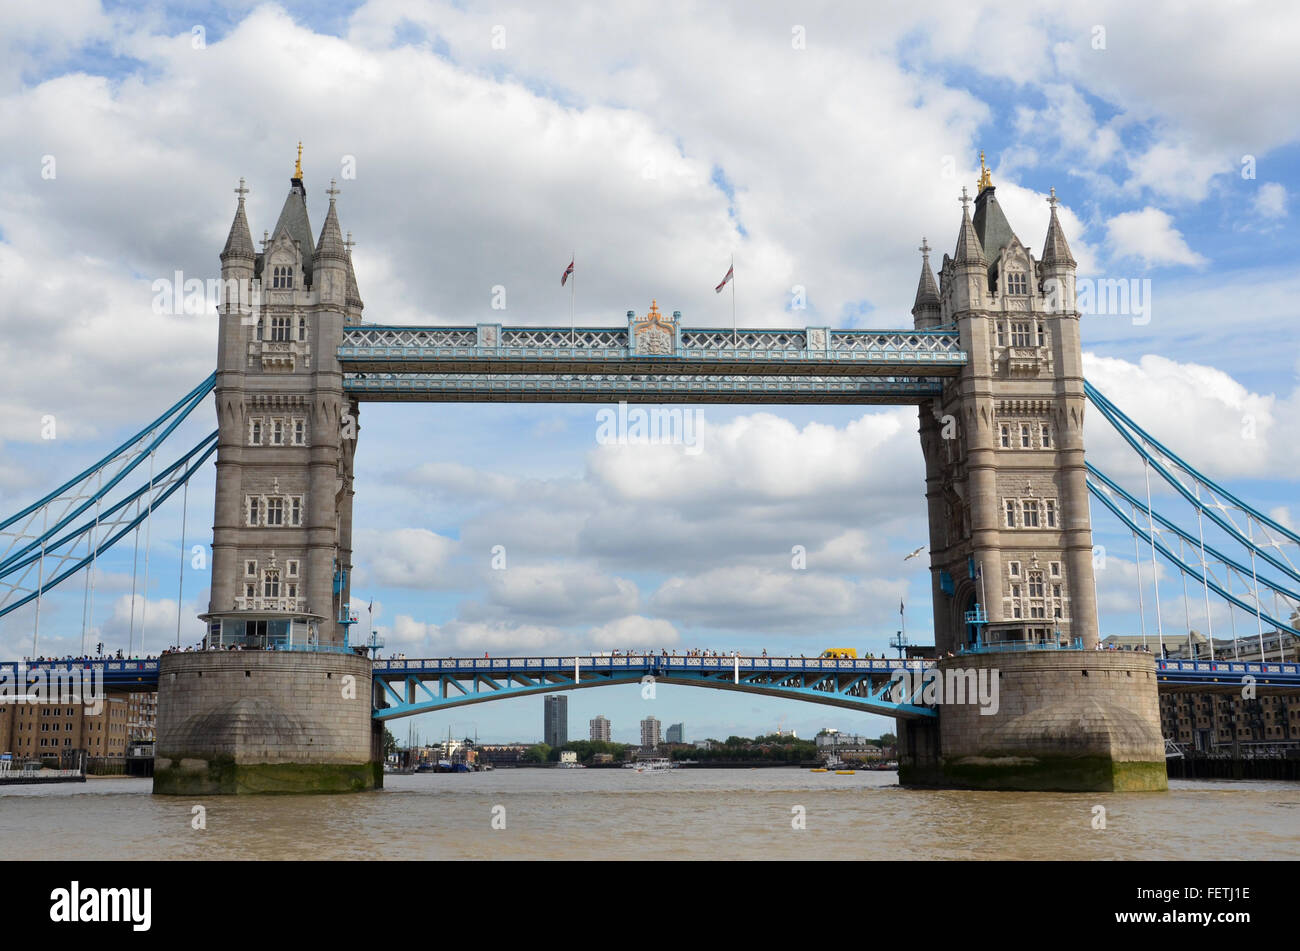 LONDON - AUGUST 6: Tower Bridge, shown from the river Thames on August 6, 2015, includes glass floors in the walkways installed Stock Photo